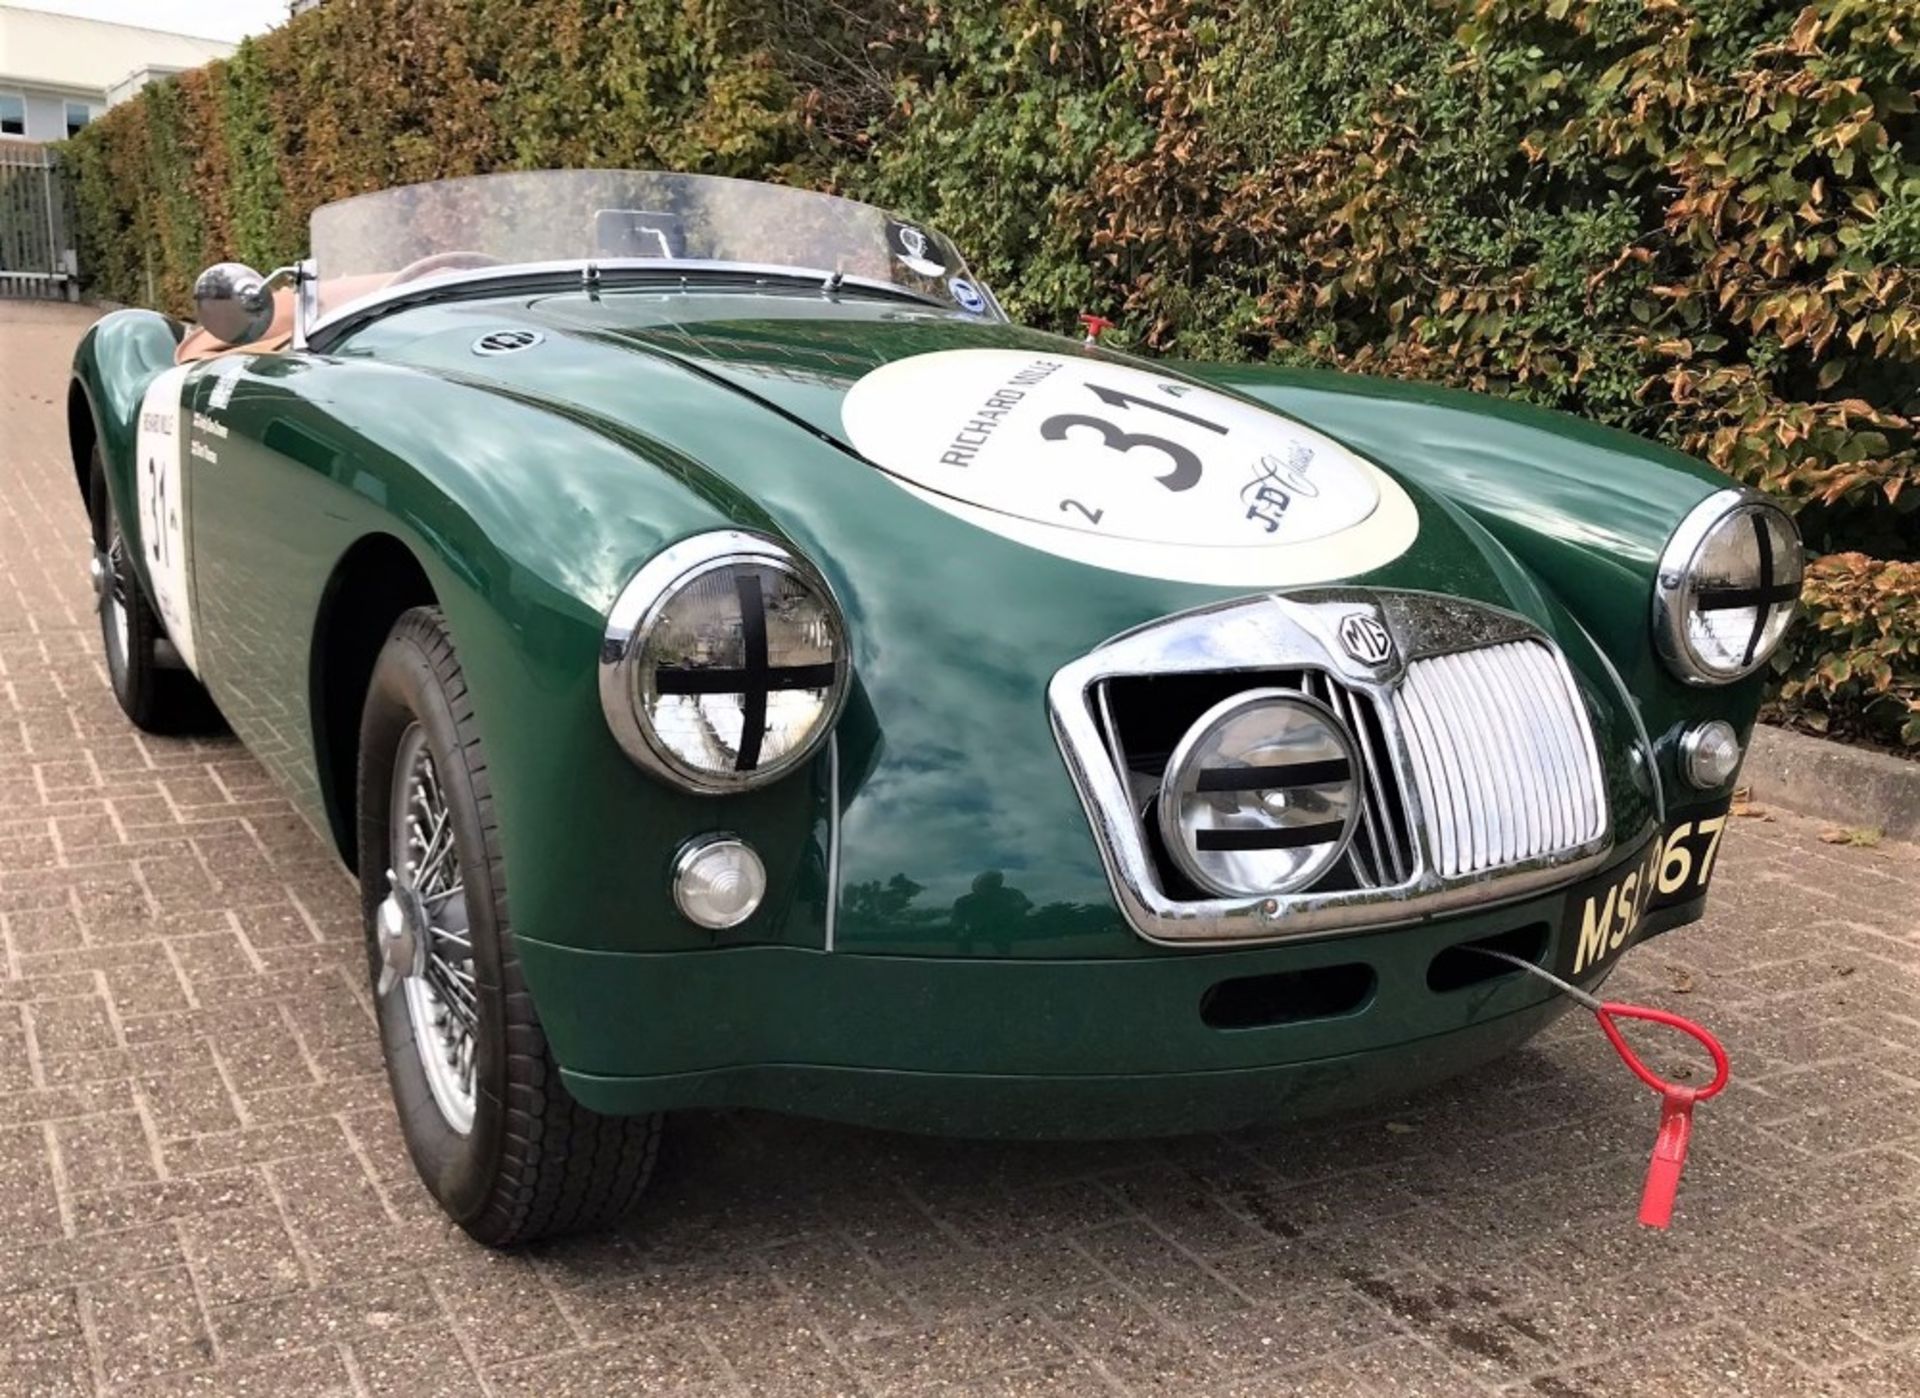 1958 MGA ROADSTER - CLASS WINNER OF LE MANS CLASSIC Registration Number: MSL 967 Chassis Number: - Image 4 of 9